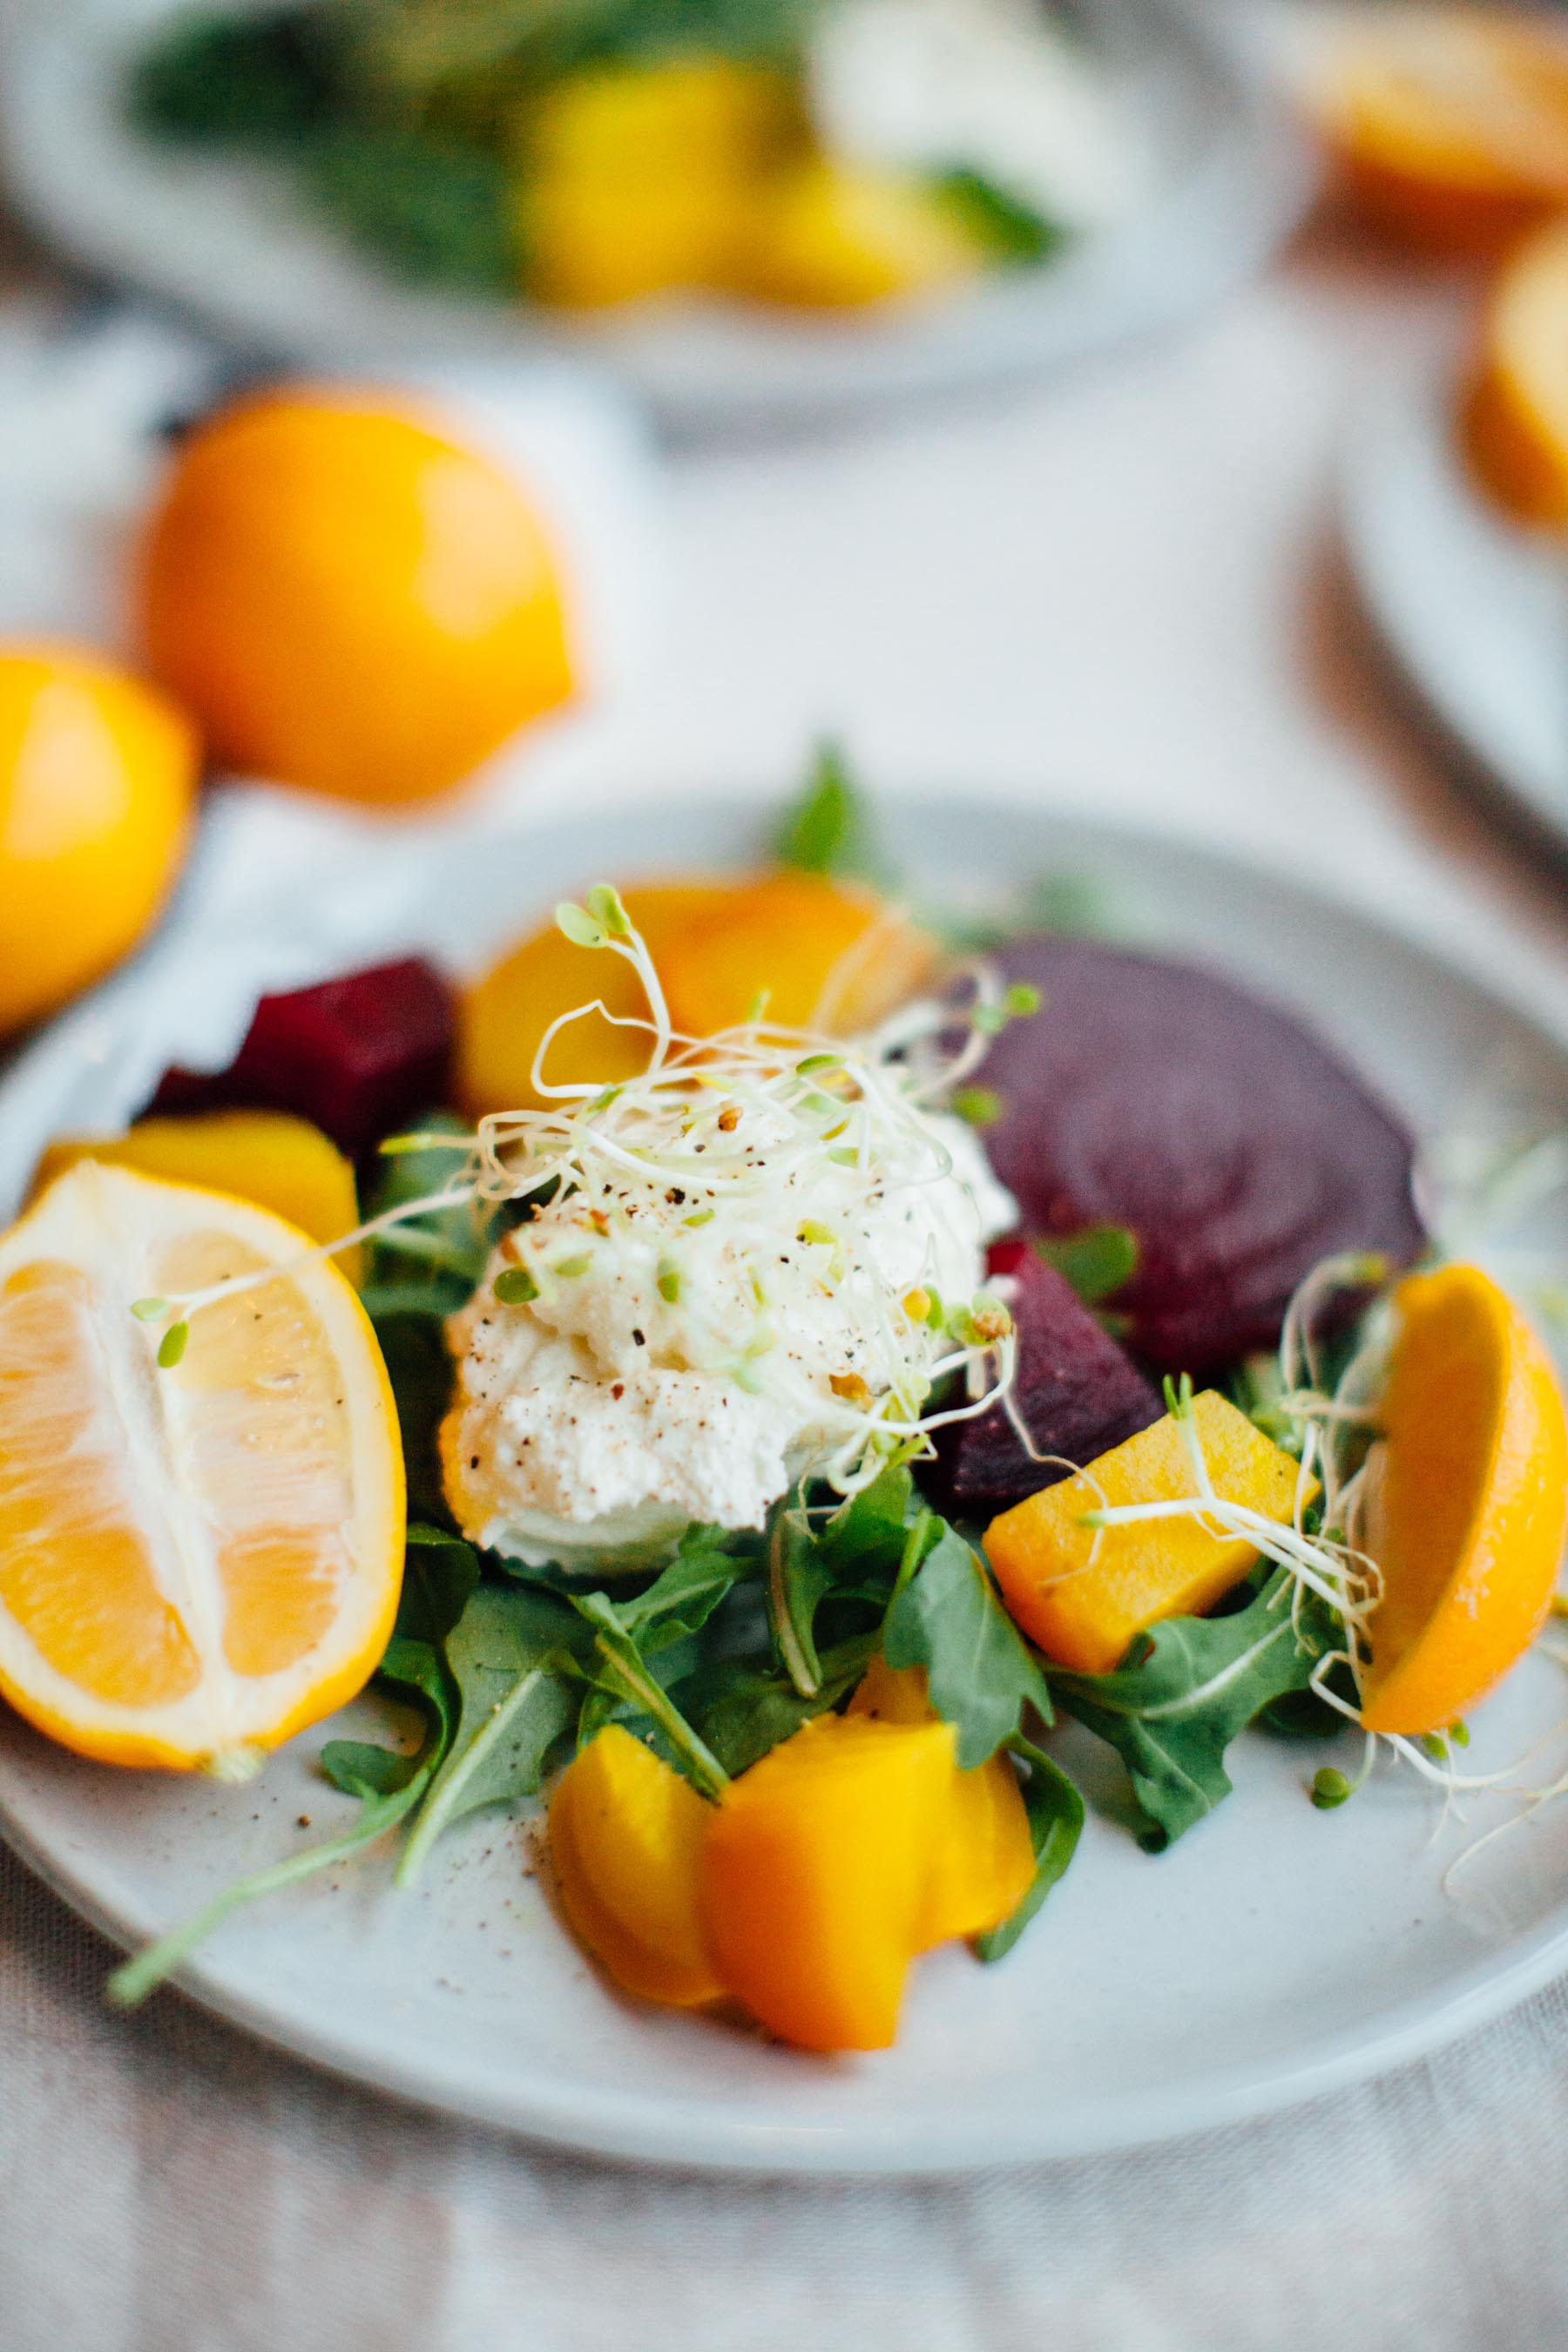 Super easy Meyer Lemon Spring Salad recipe with Dorot frozen garlic, arugula, sprouts, and golden beets | bygabriella.co #sponsored